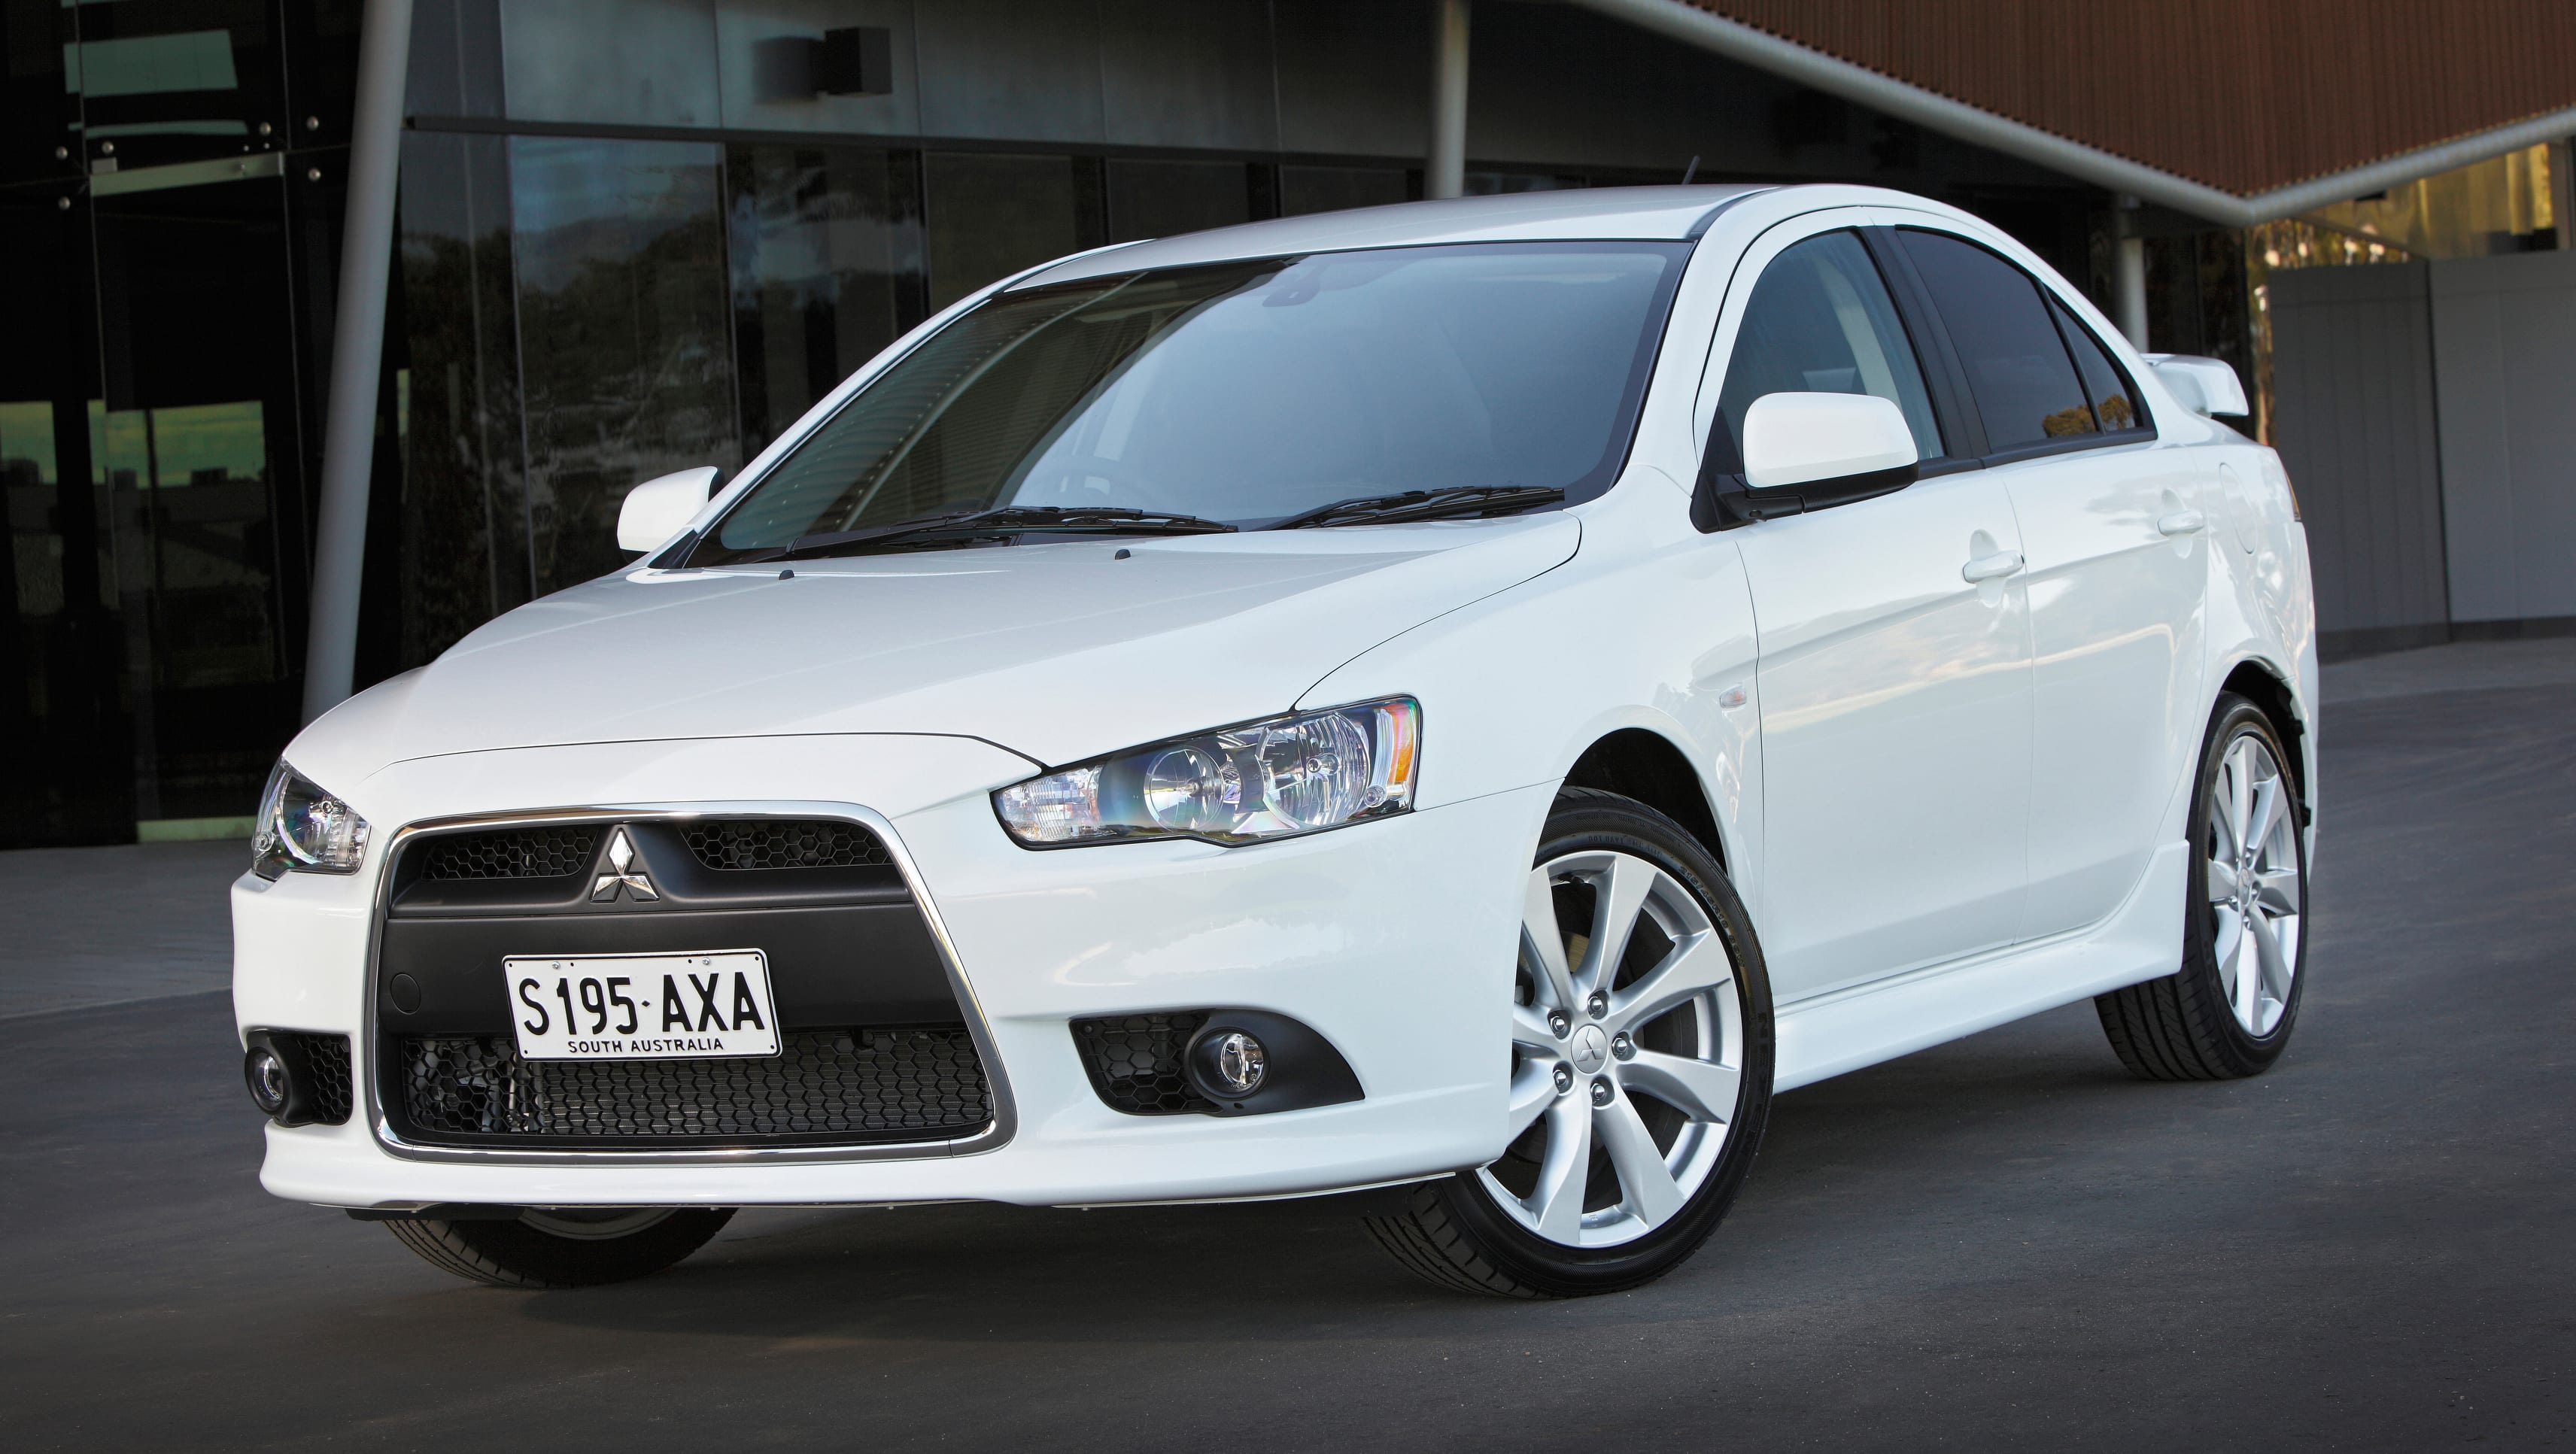 Used Mitsubishi Lancer review: 2007-2018 | CarsGuide